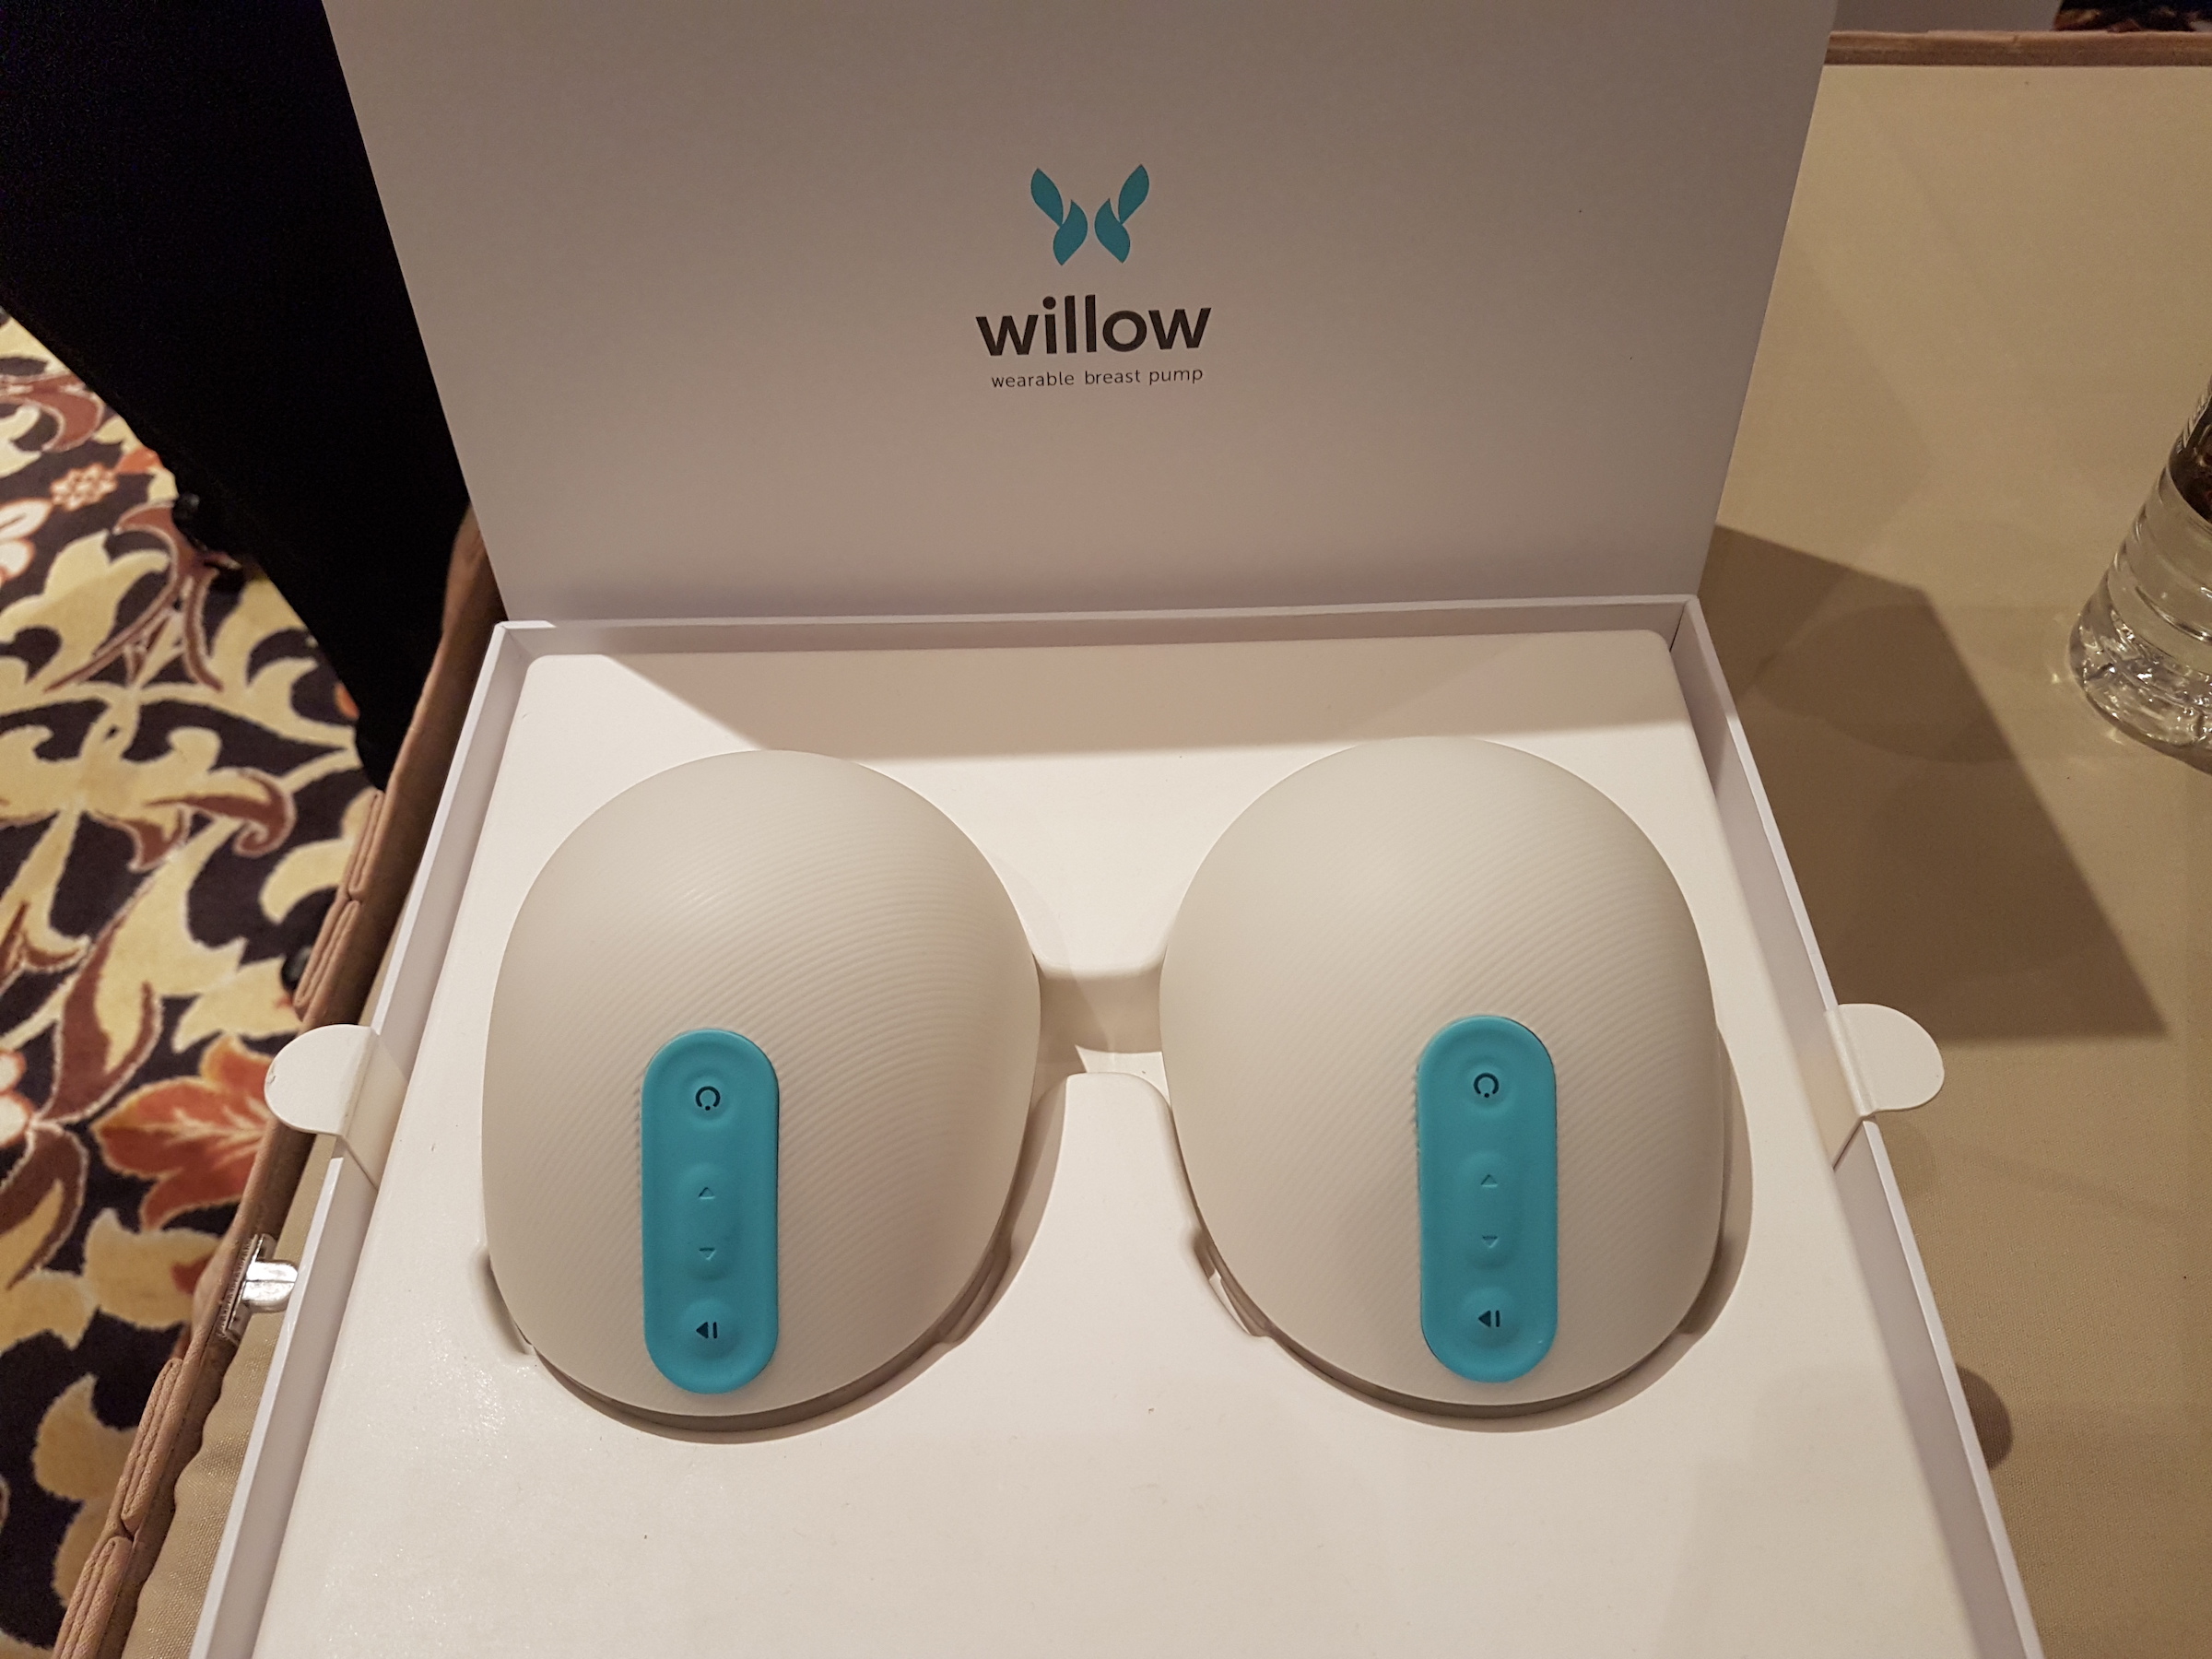 willow-breast-pump-ces-2017.jpg